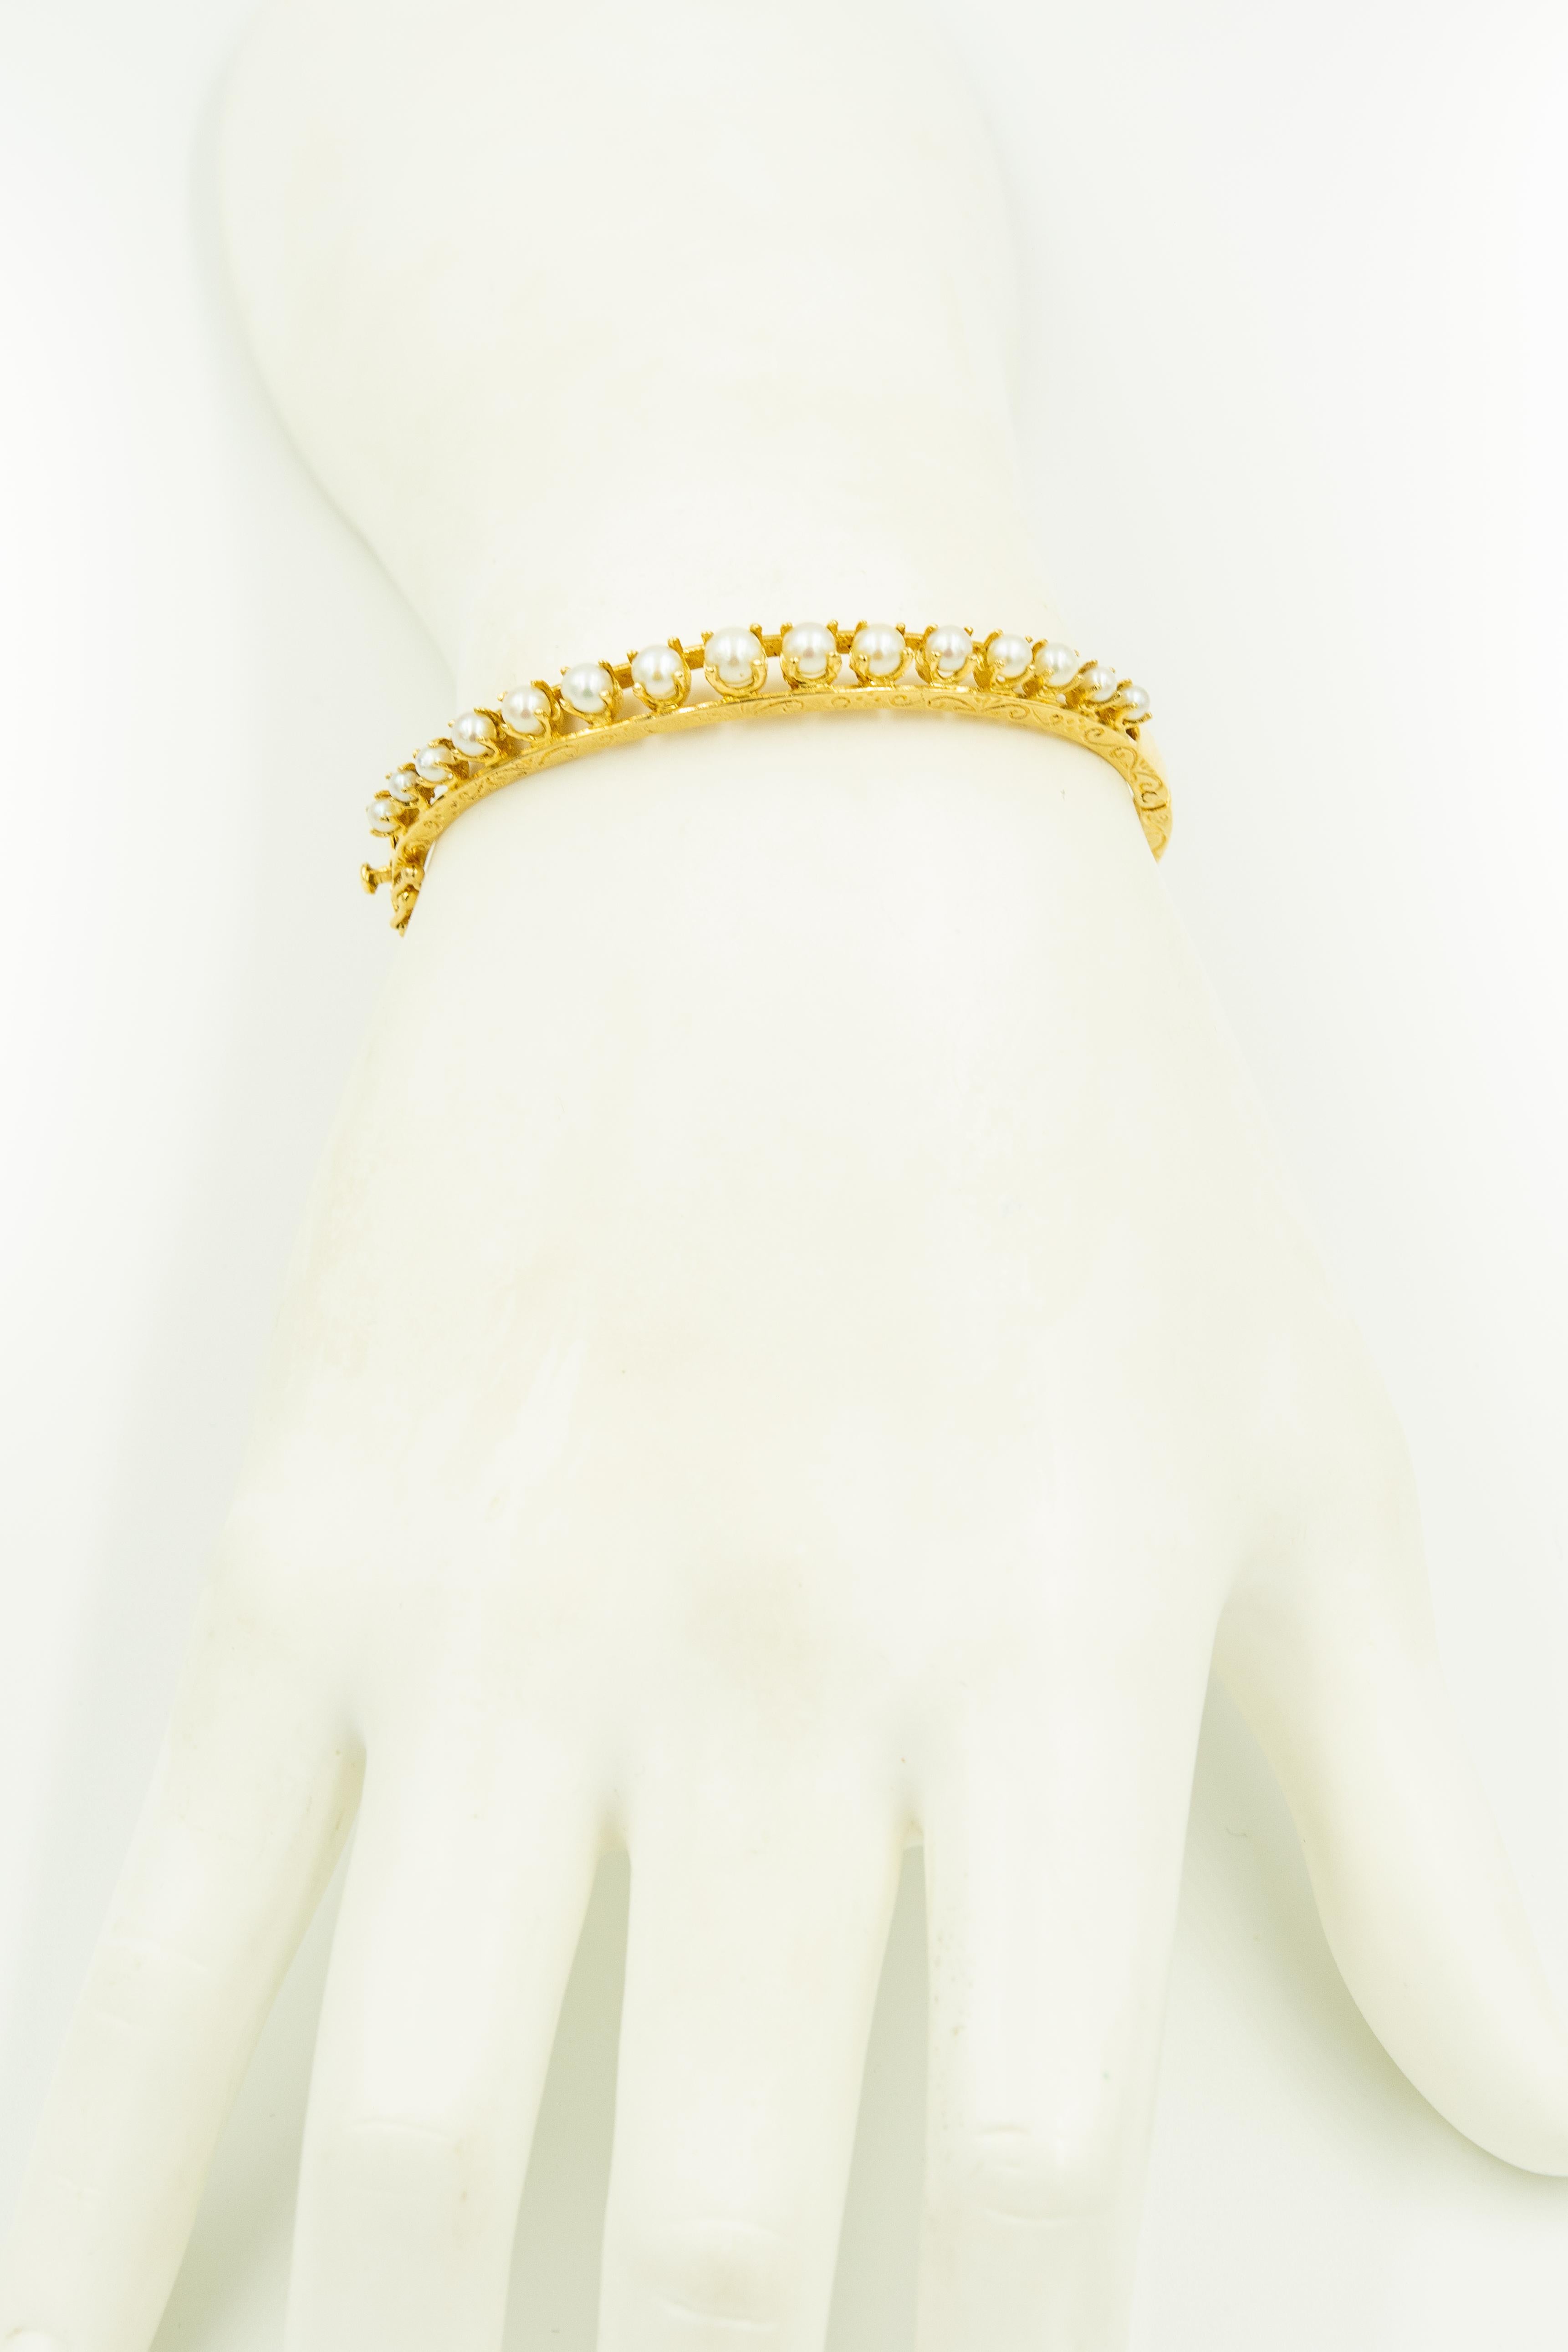 1950s Graduated Cultured Pearl Yellow Gold Bangle Bracelet with Etched Sides 3